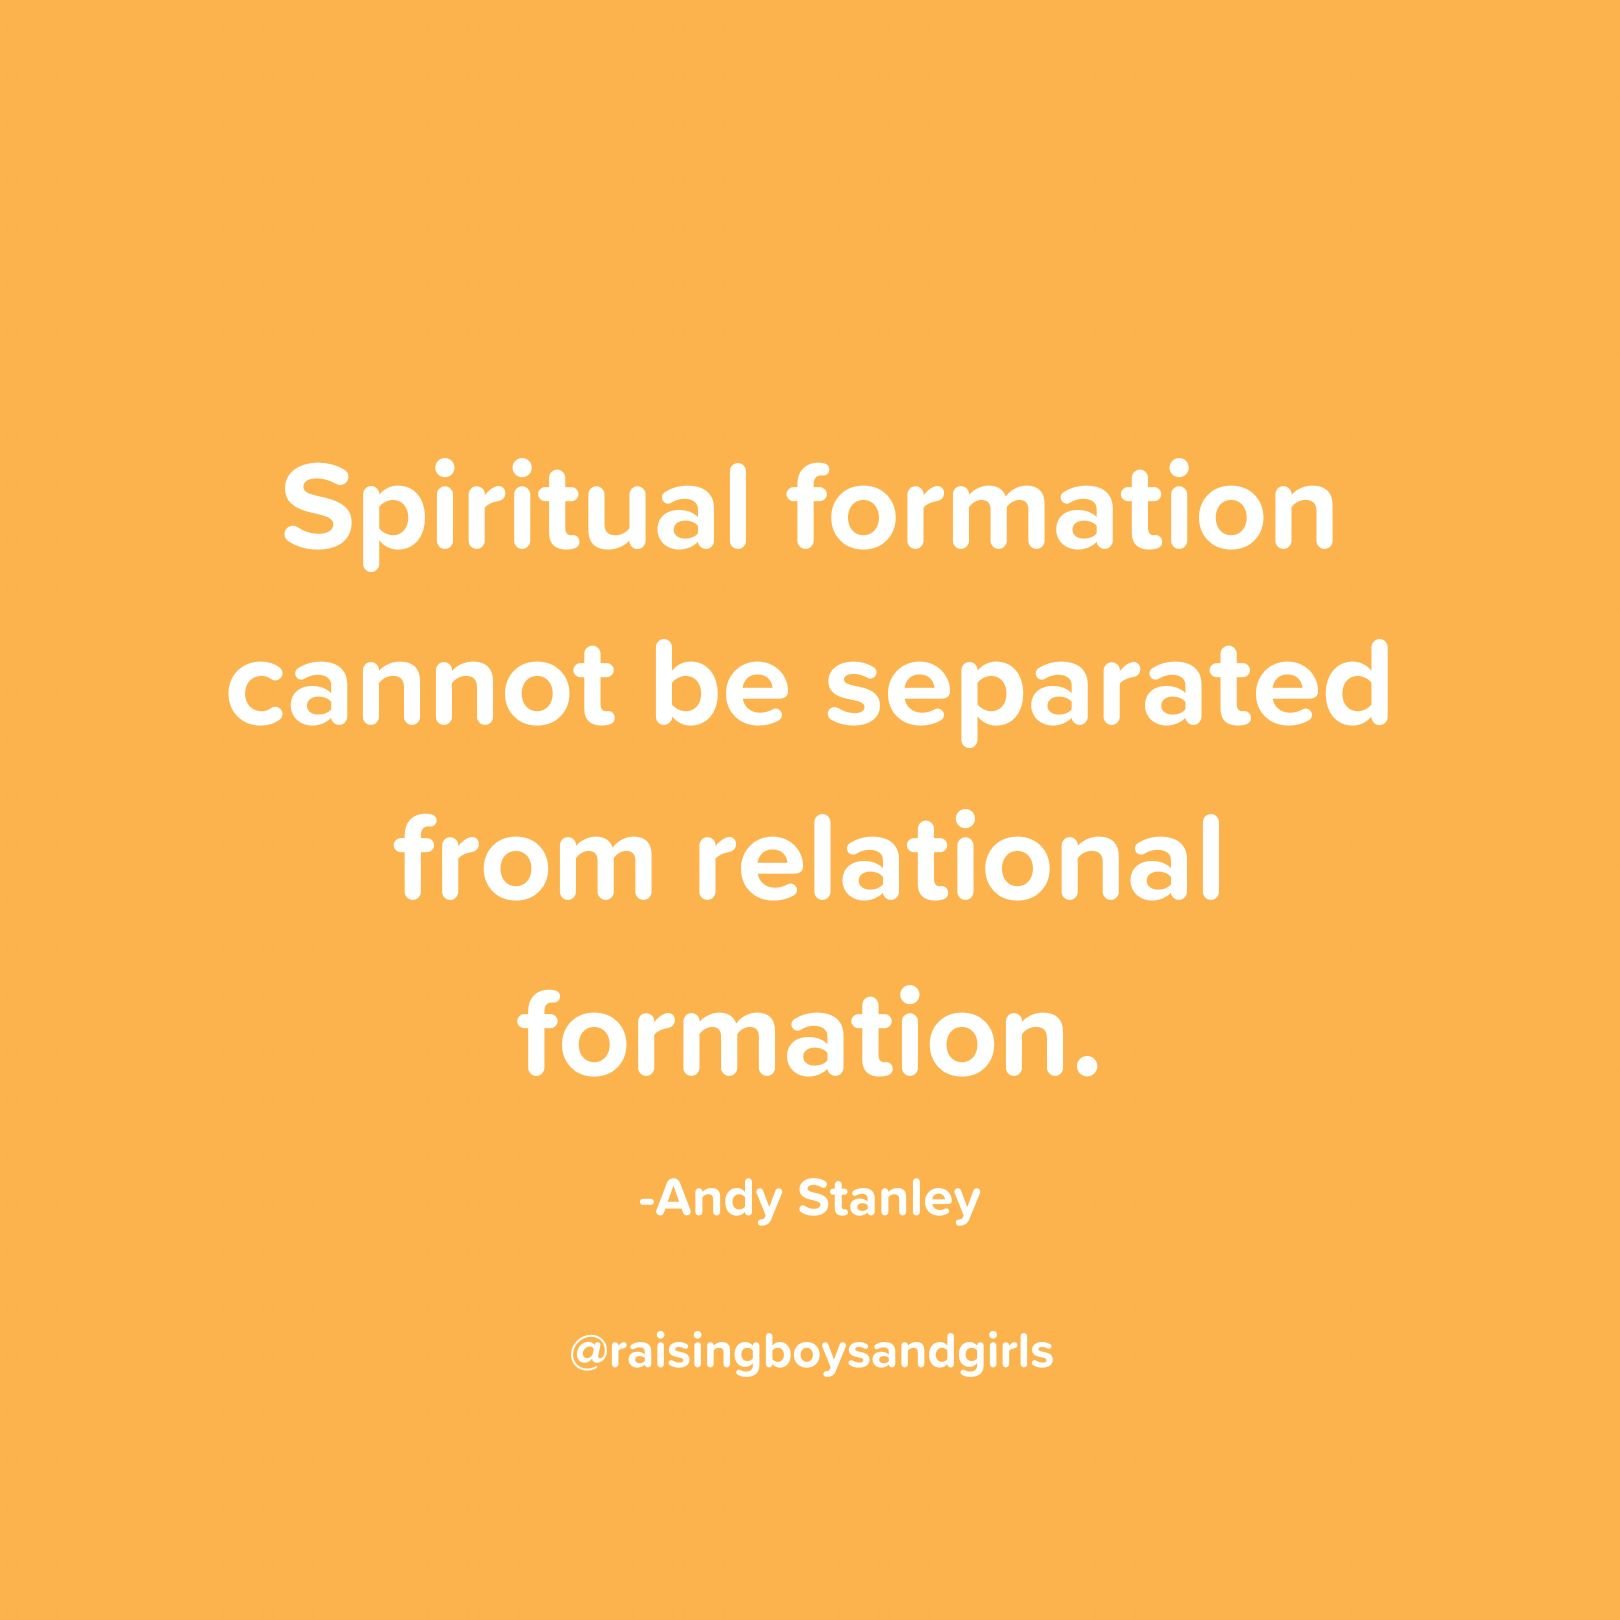 Andy Stanley Quote 2.jpg